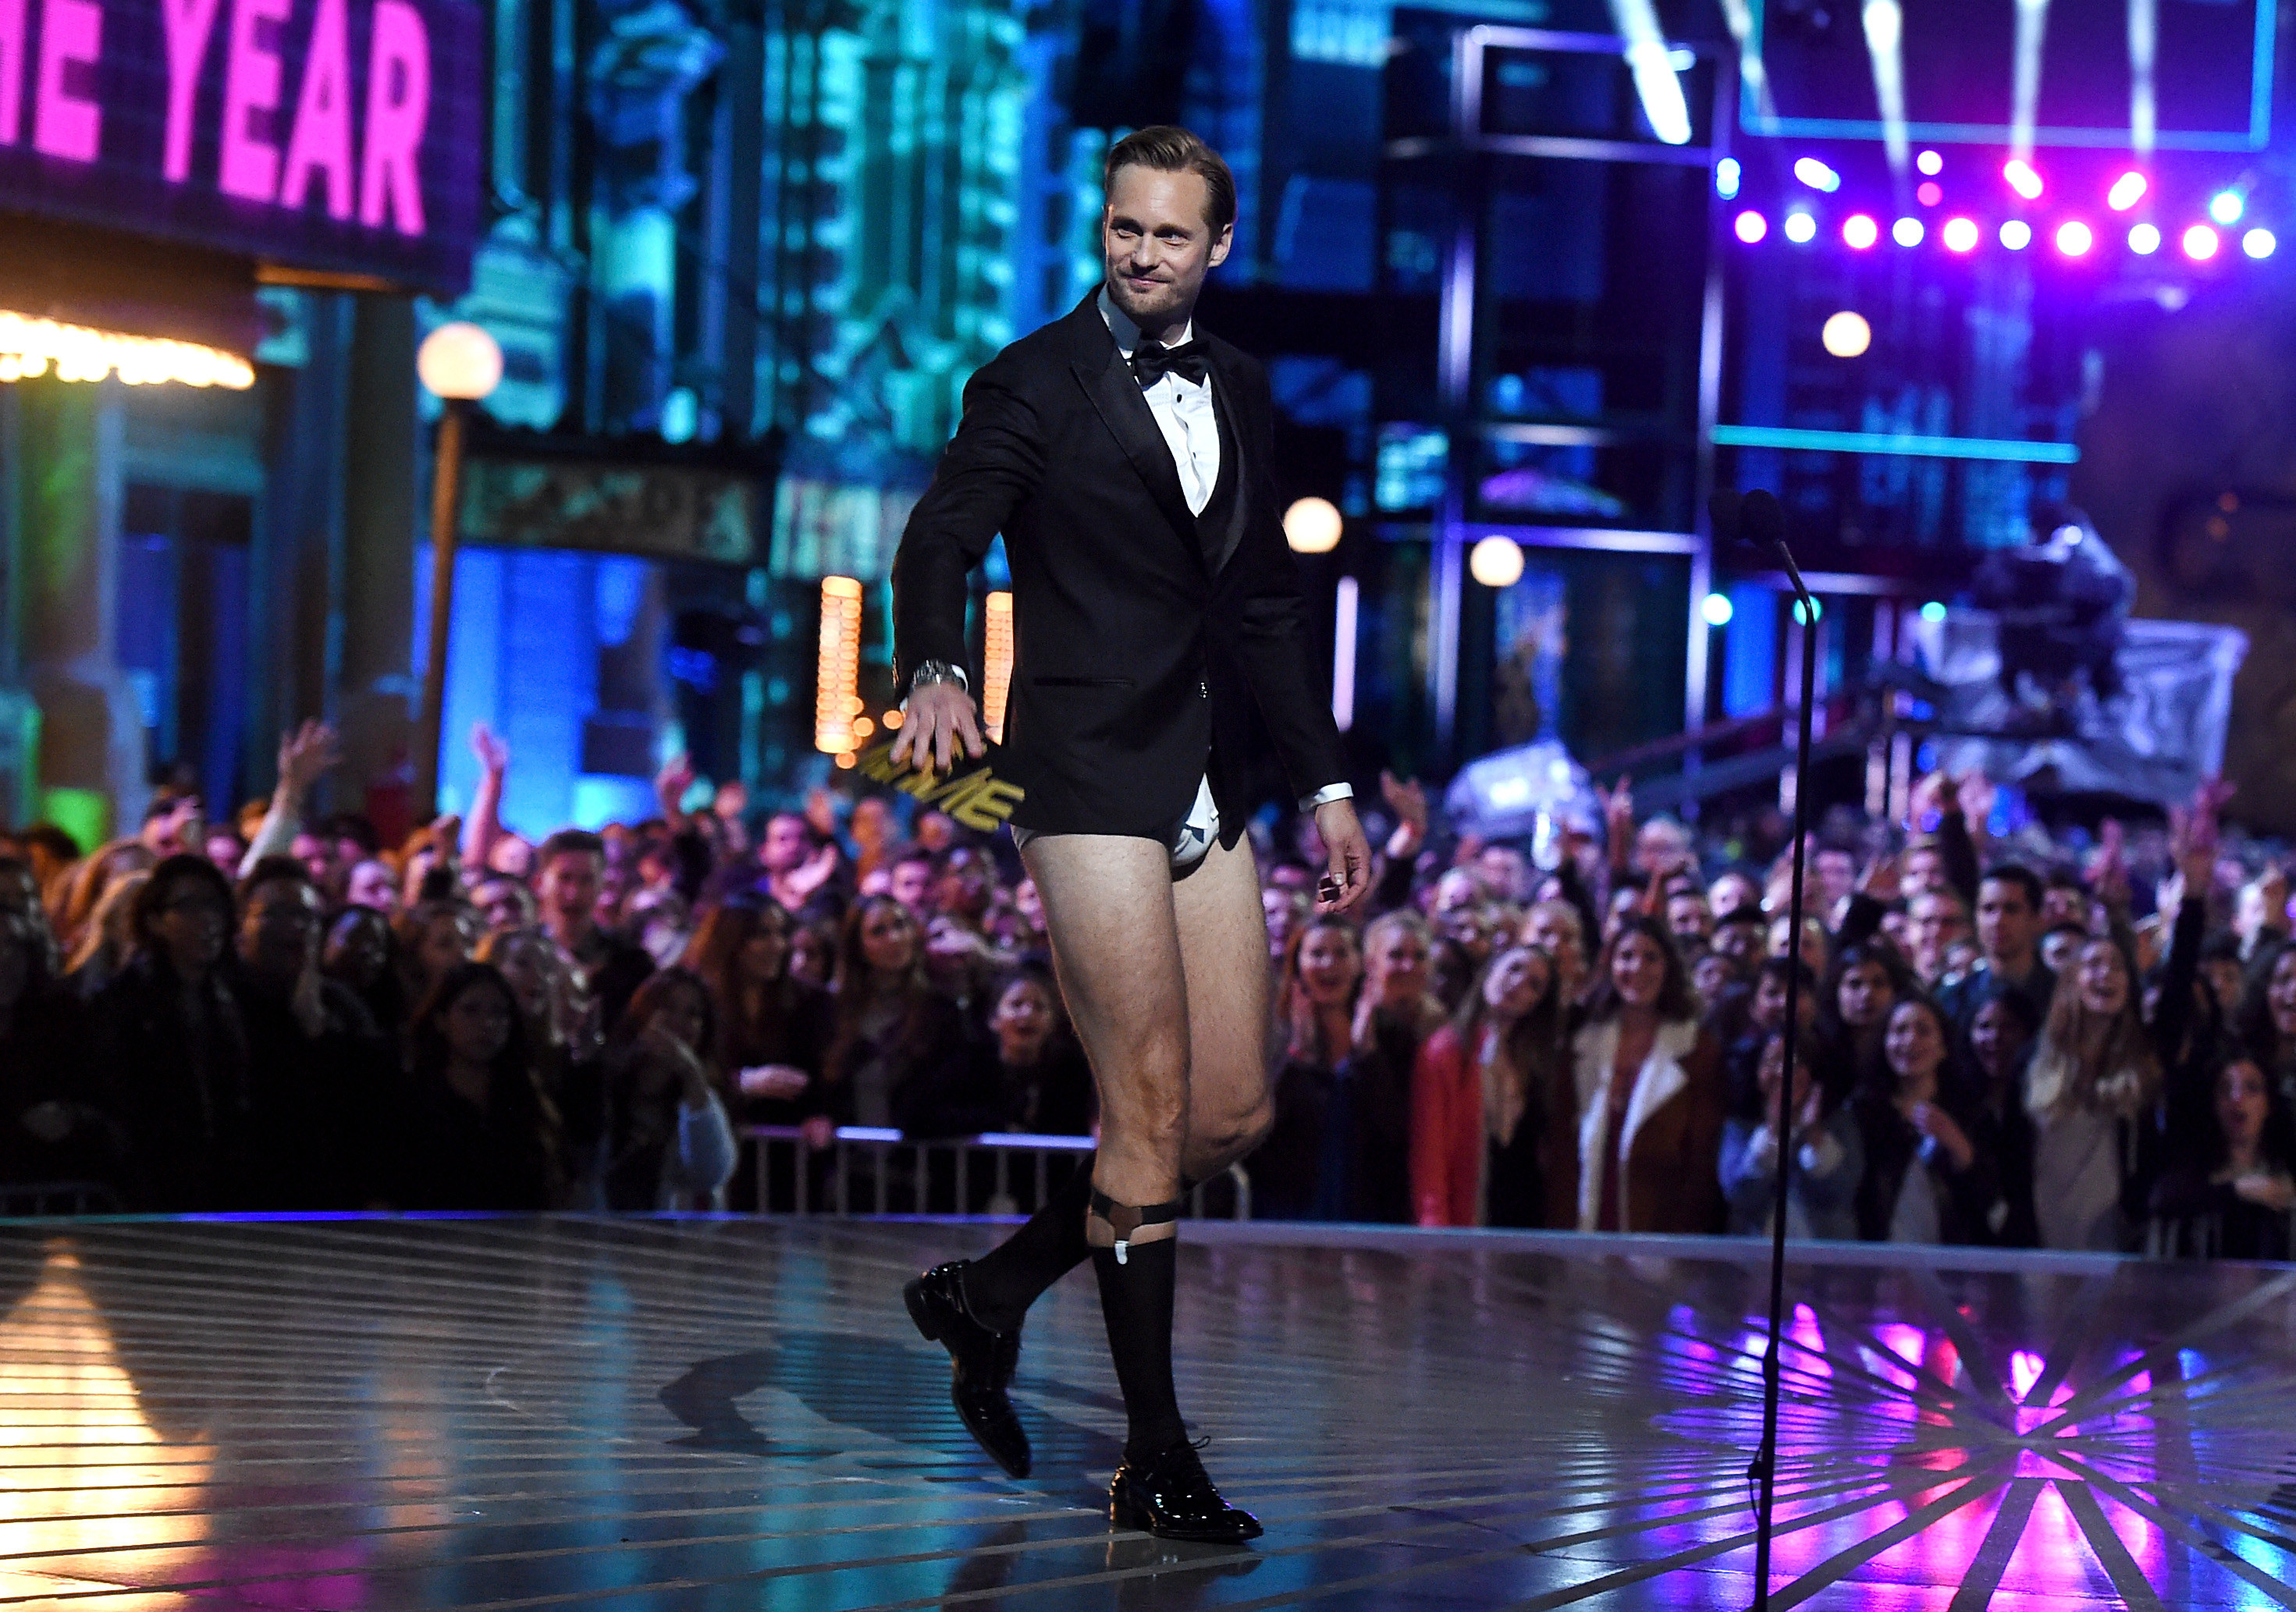 Alexander walks on stage with no pants on